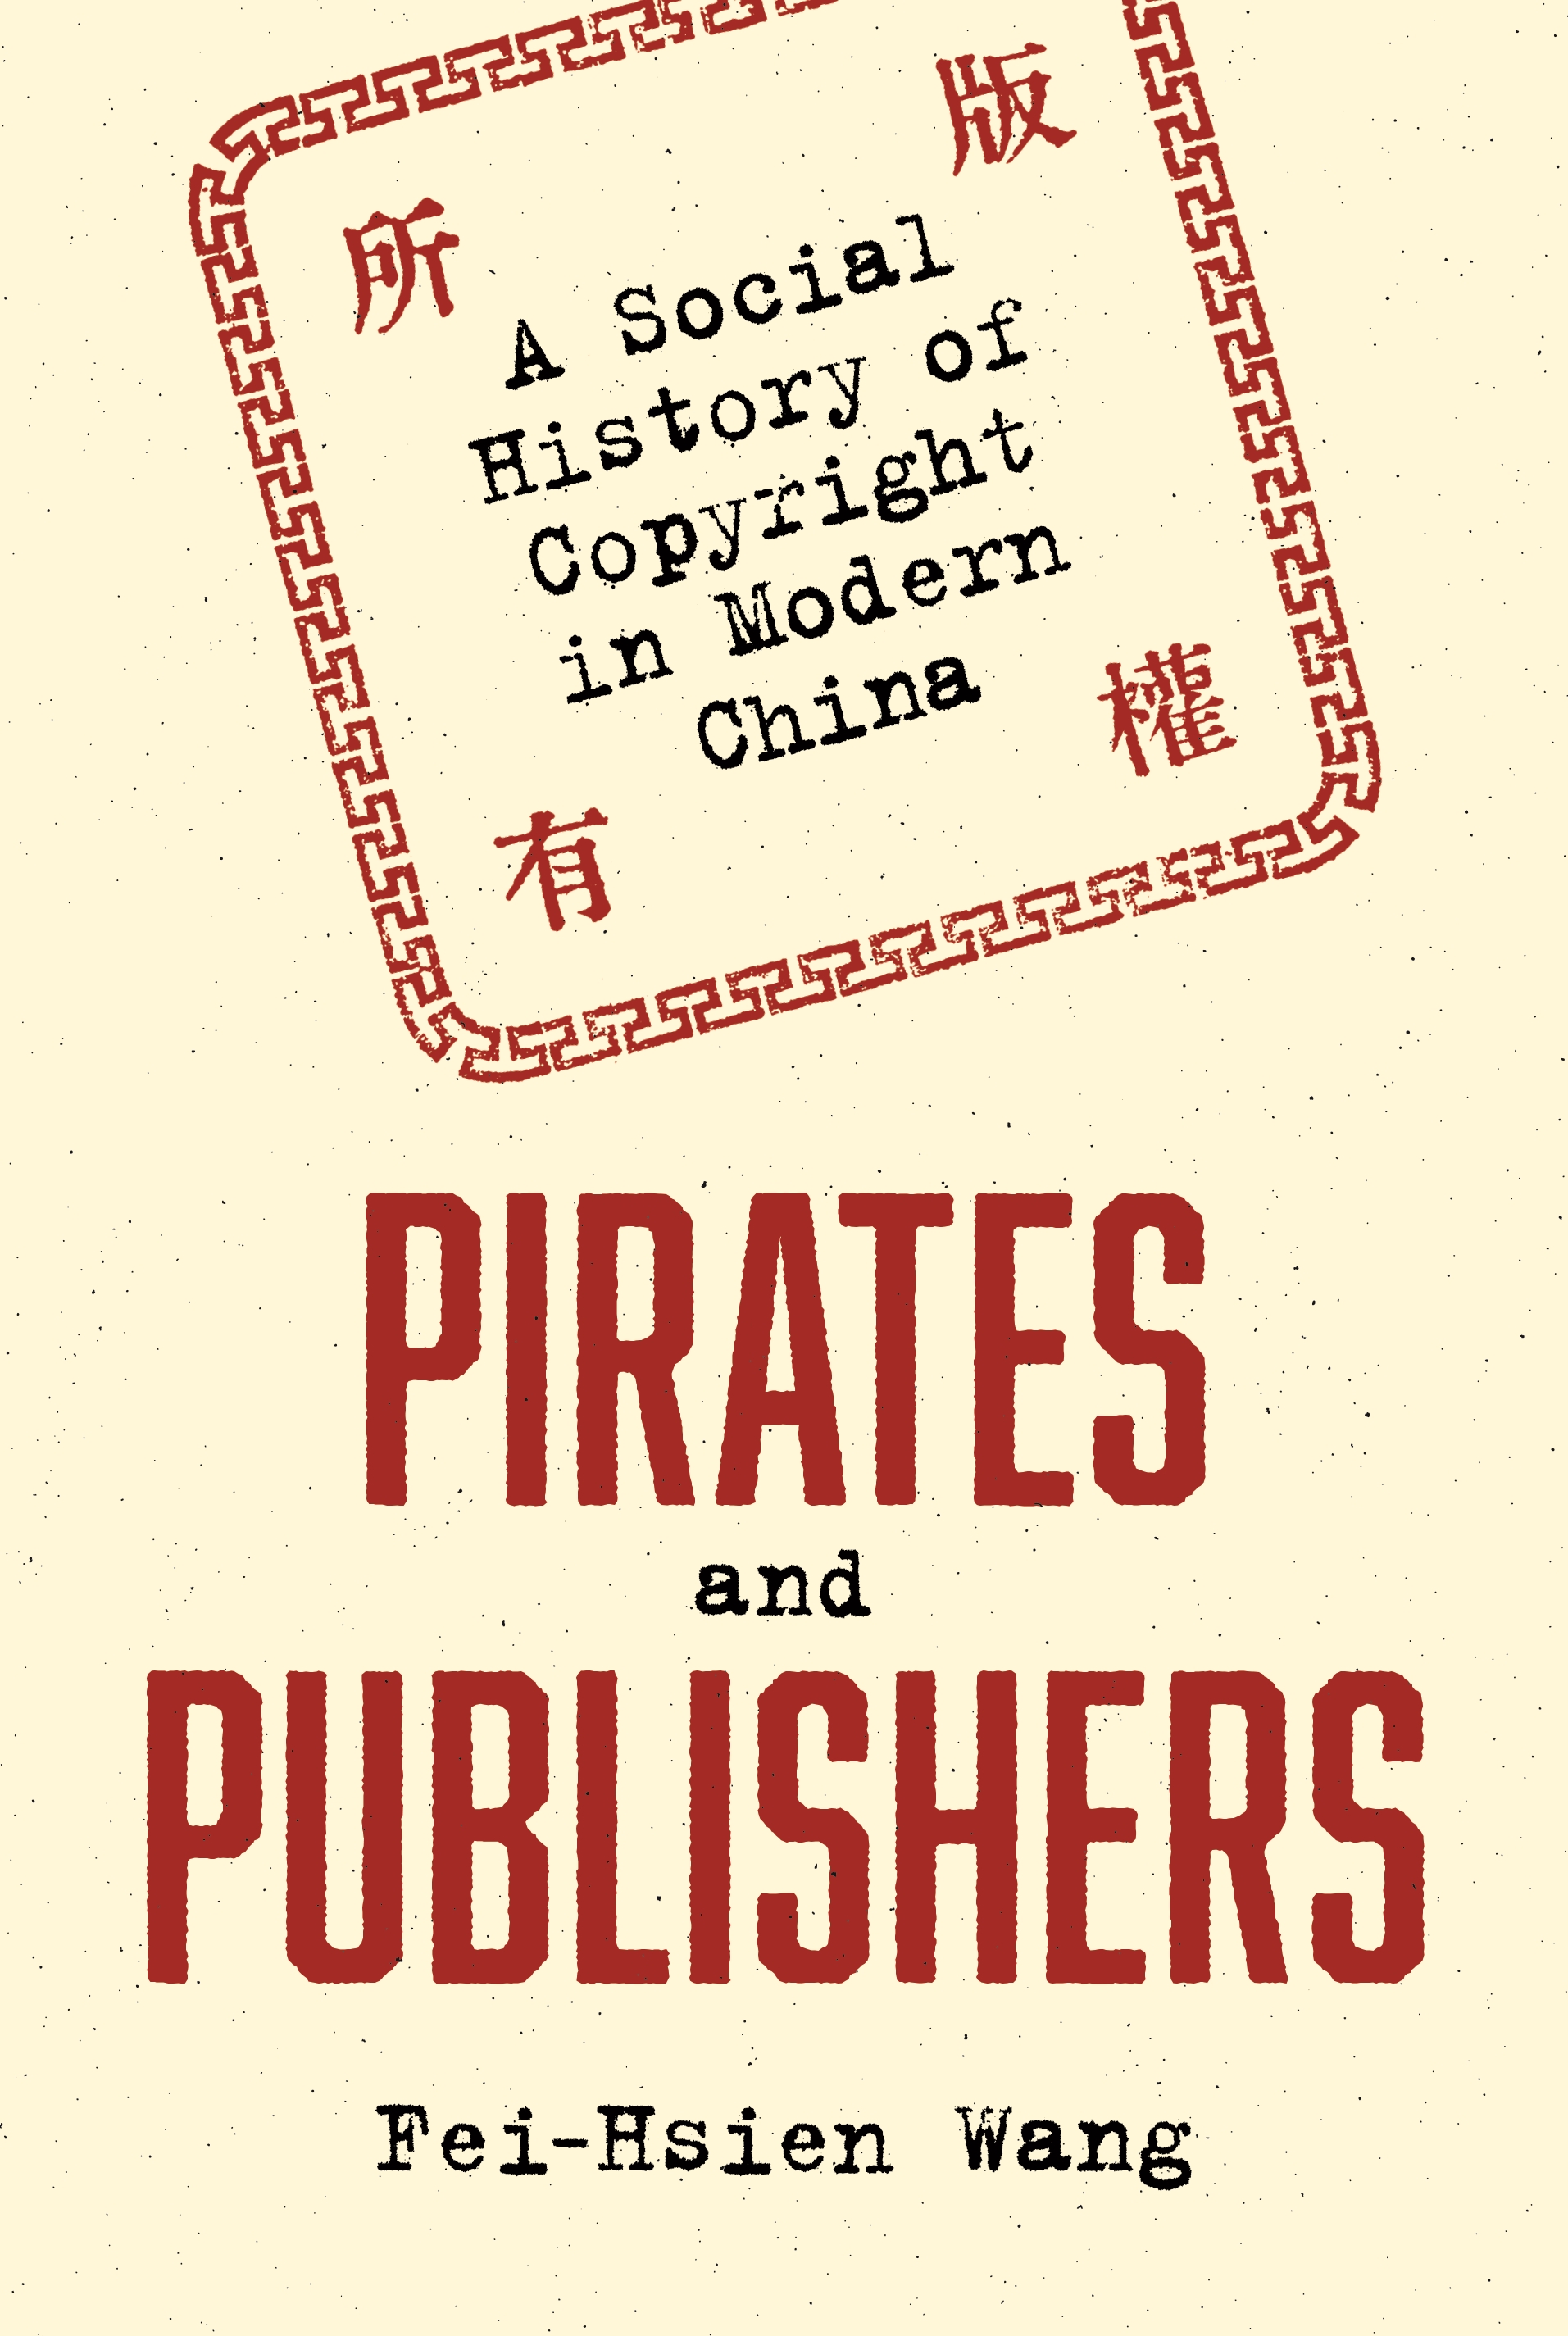 Faked in China: Inside the pirates' web